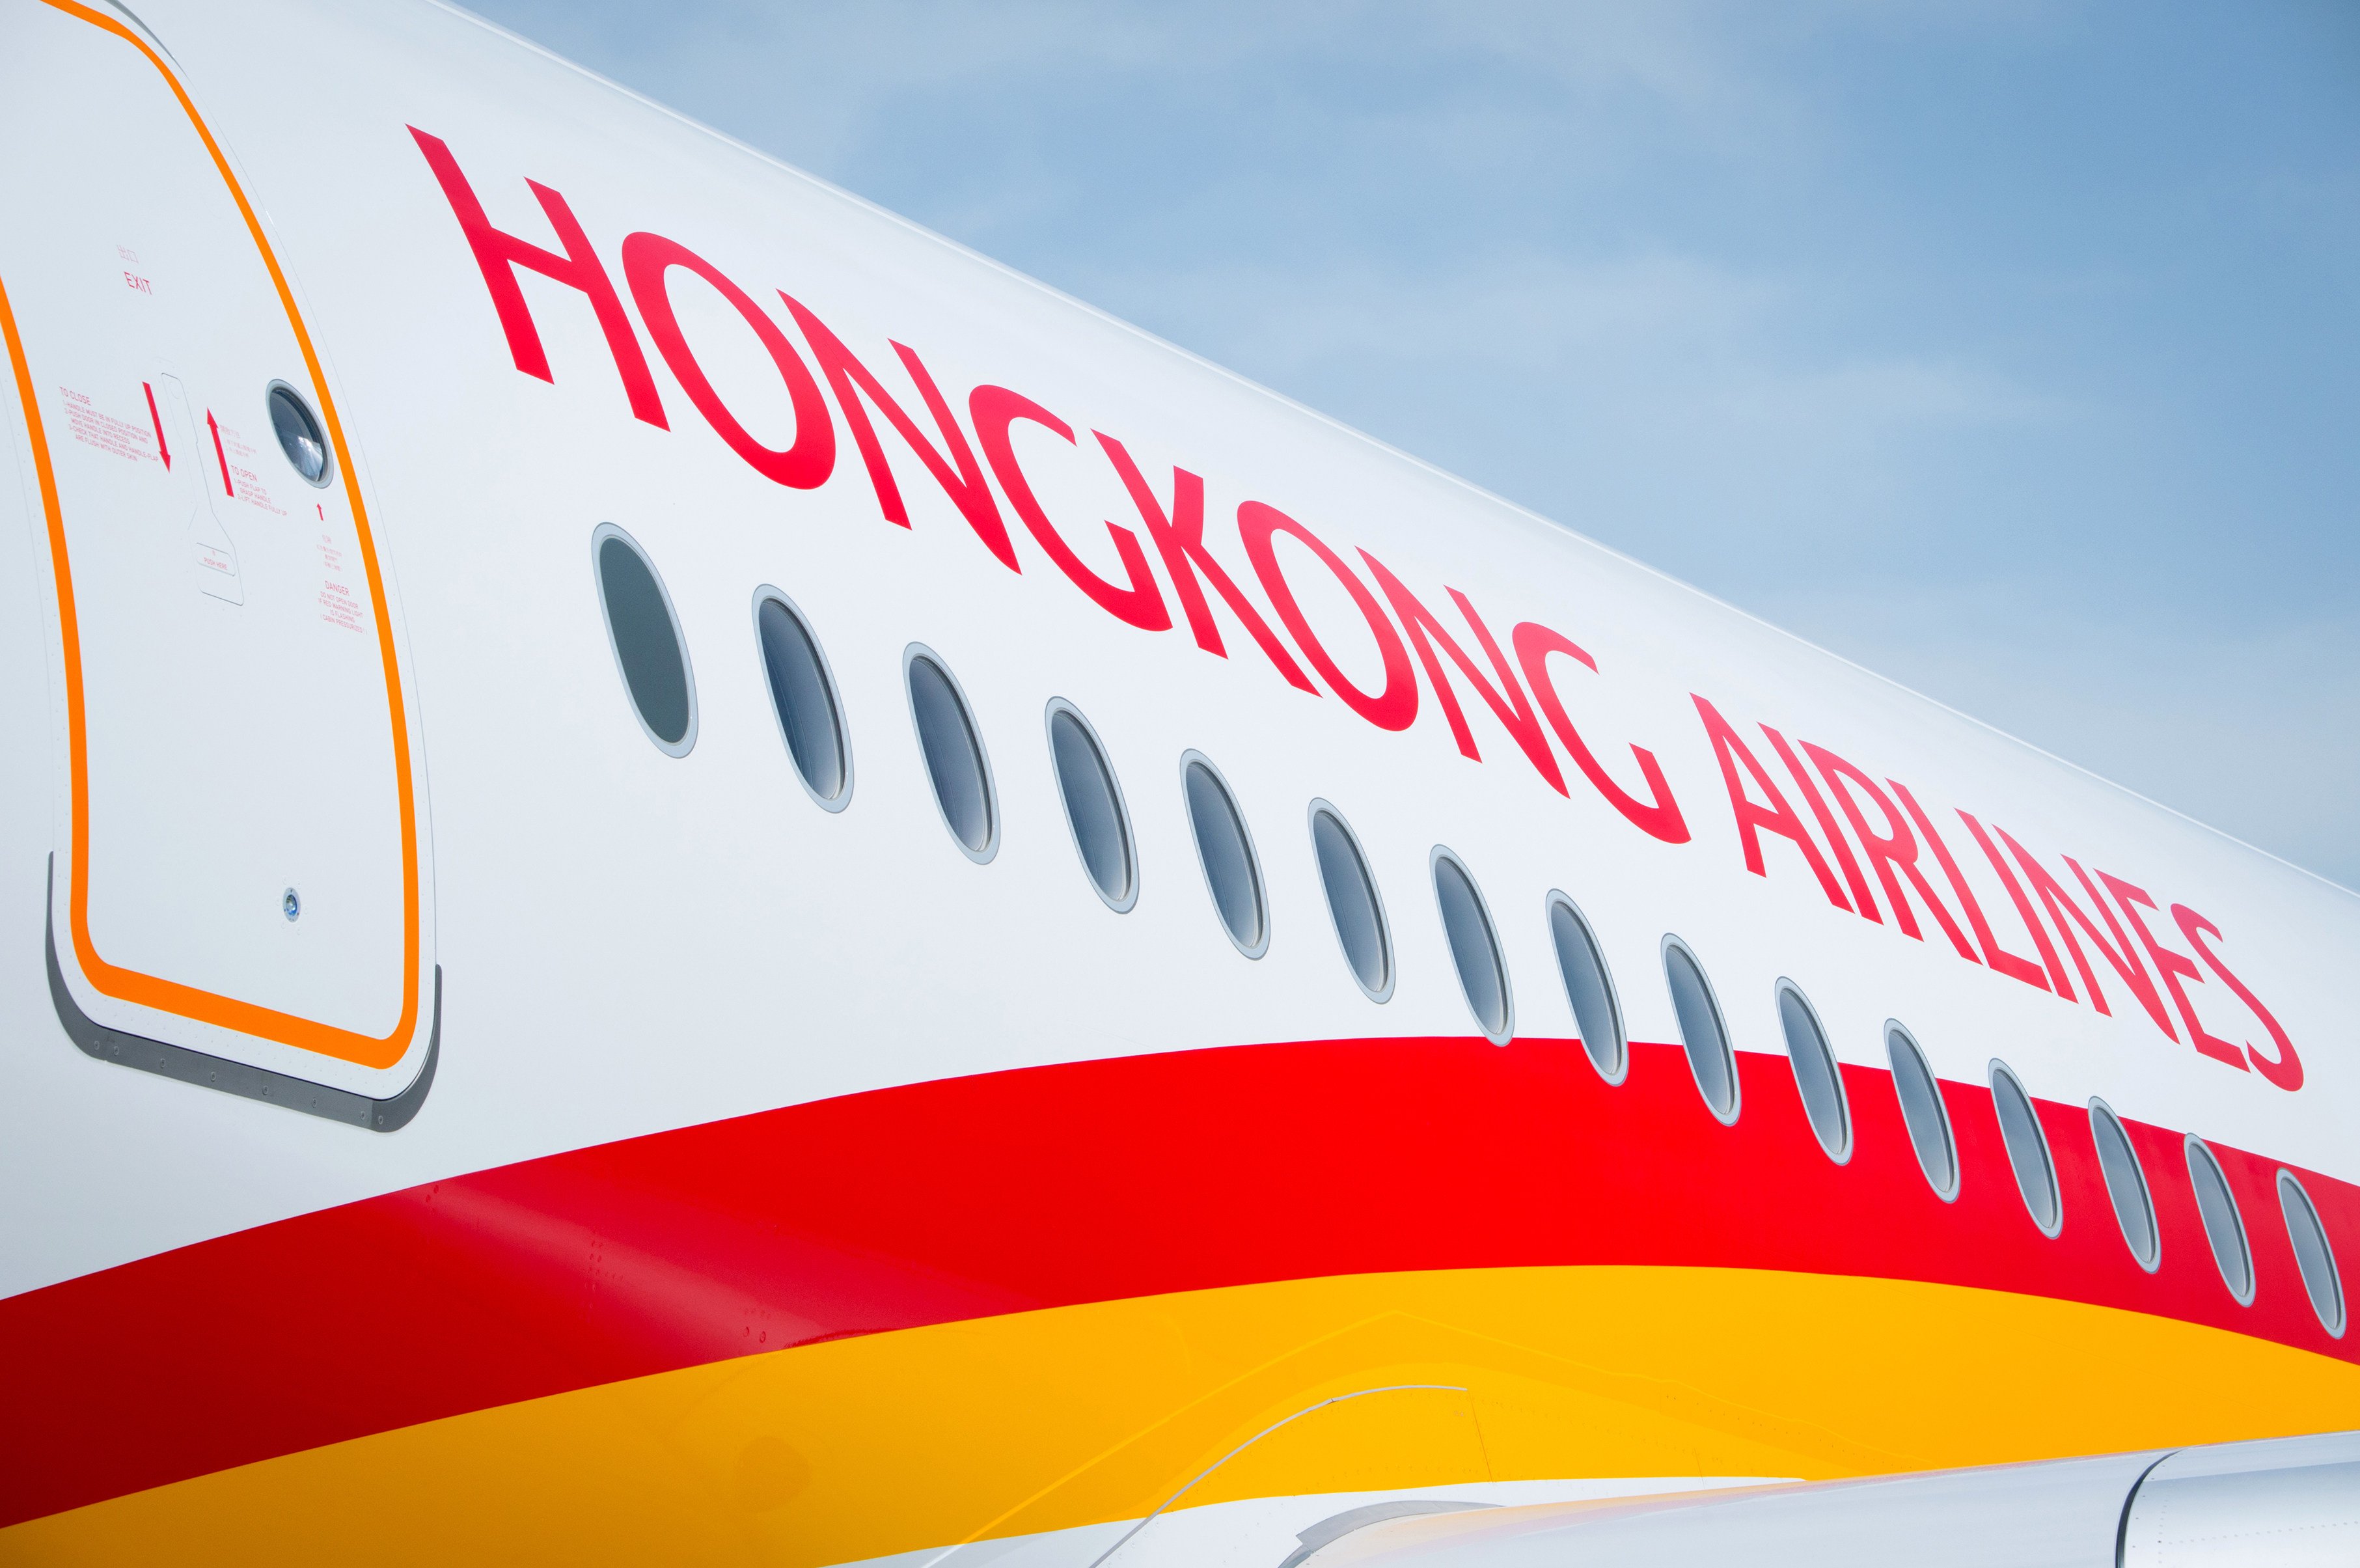 Hopeful travellers struggled to book free tickets on Hong Kong Airlines Photo: Airbus.